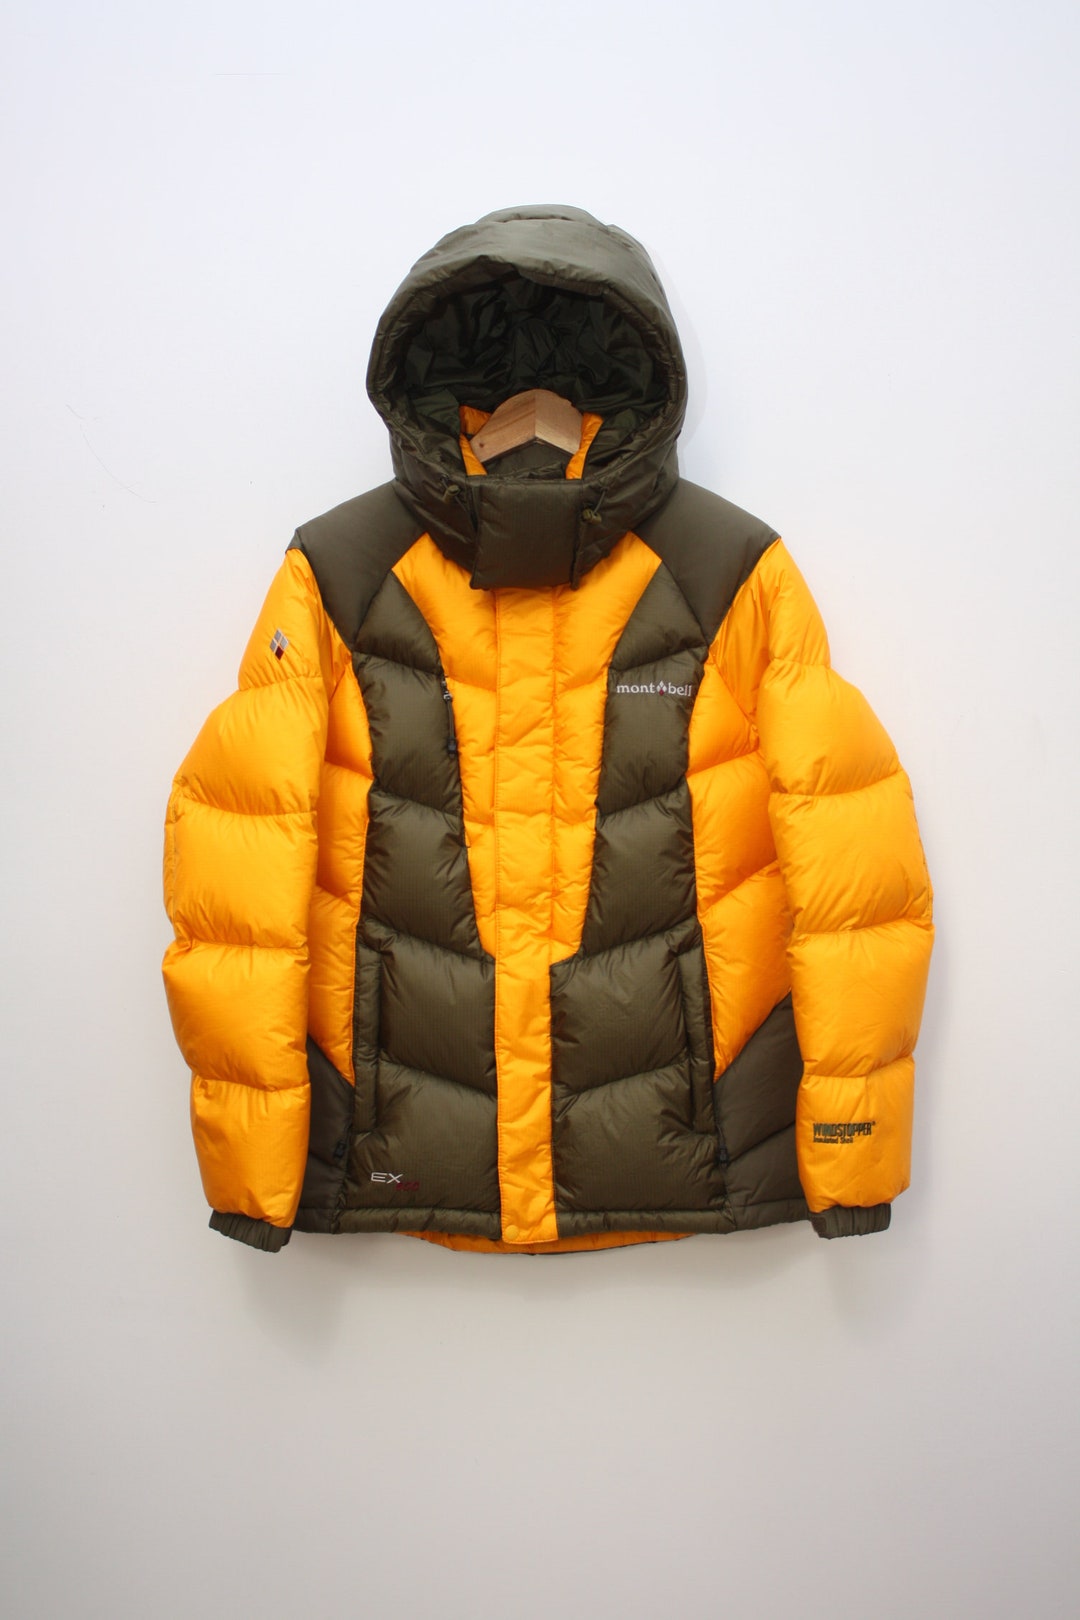 Montbell Yellow Puffer Down Jacket - Etsy